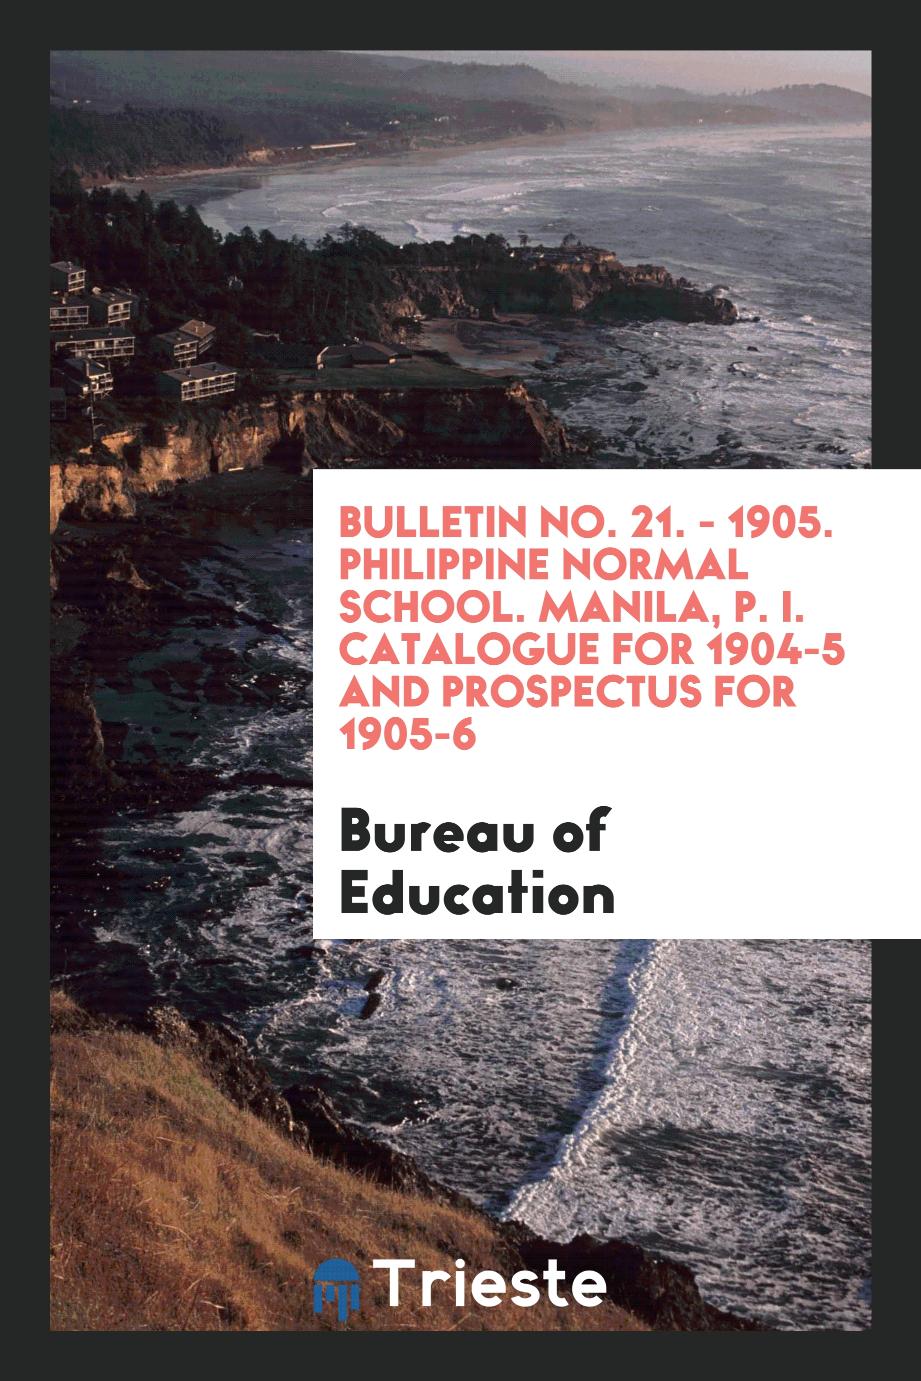 Bulletin No. 21. - 1905. Philippine normal school. Manila, P. I. Catalogue for 1904-5 and prospectus for 1905-6